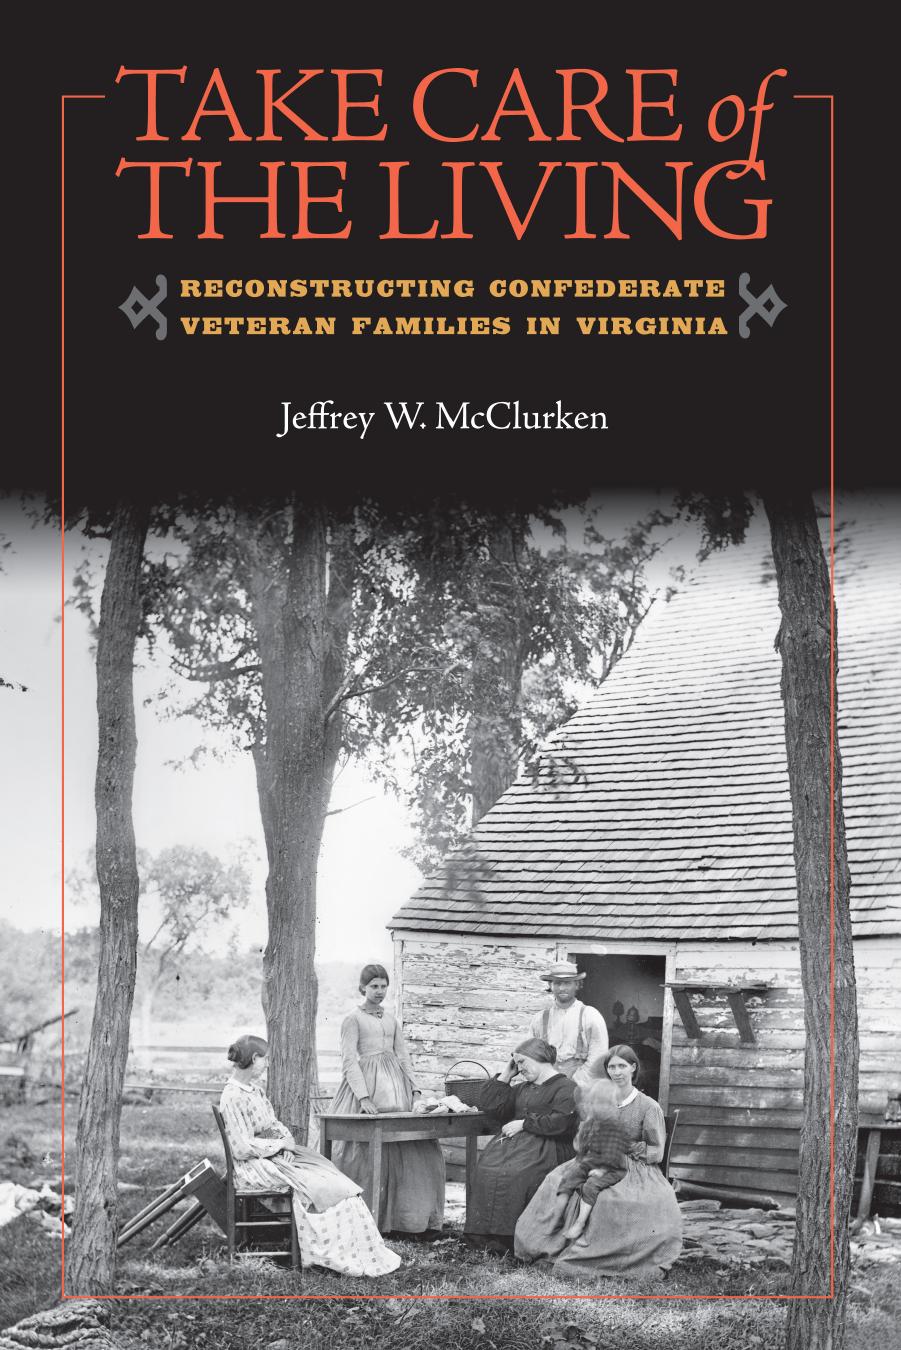 Take Care of the Living: Reconstructing Confederate Veteran Families in Virginia by Jeffrey W. McClurken